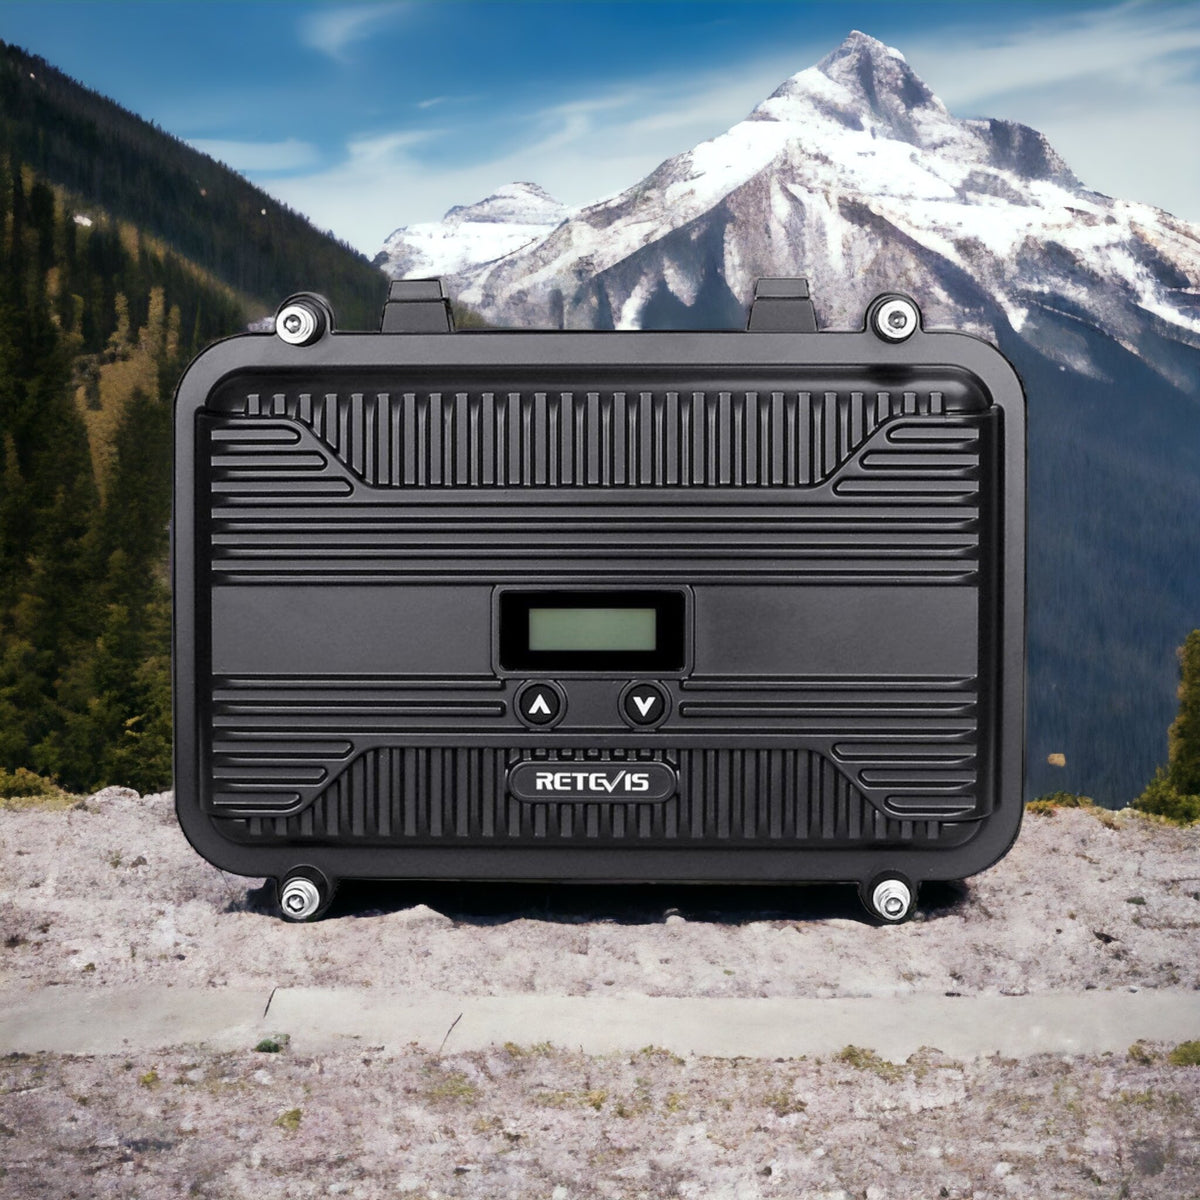 Retevis RT97S Portable GMRS Repeater –